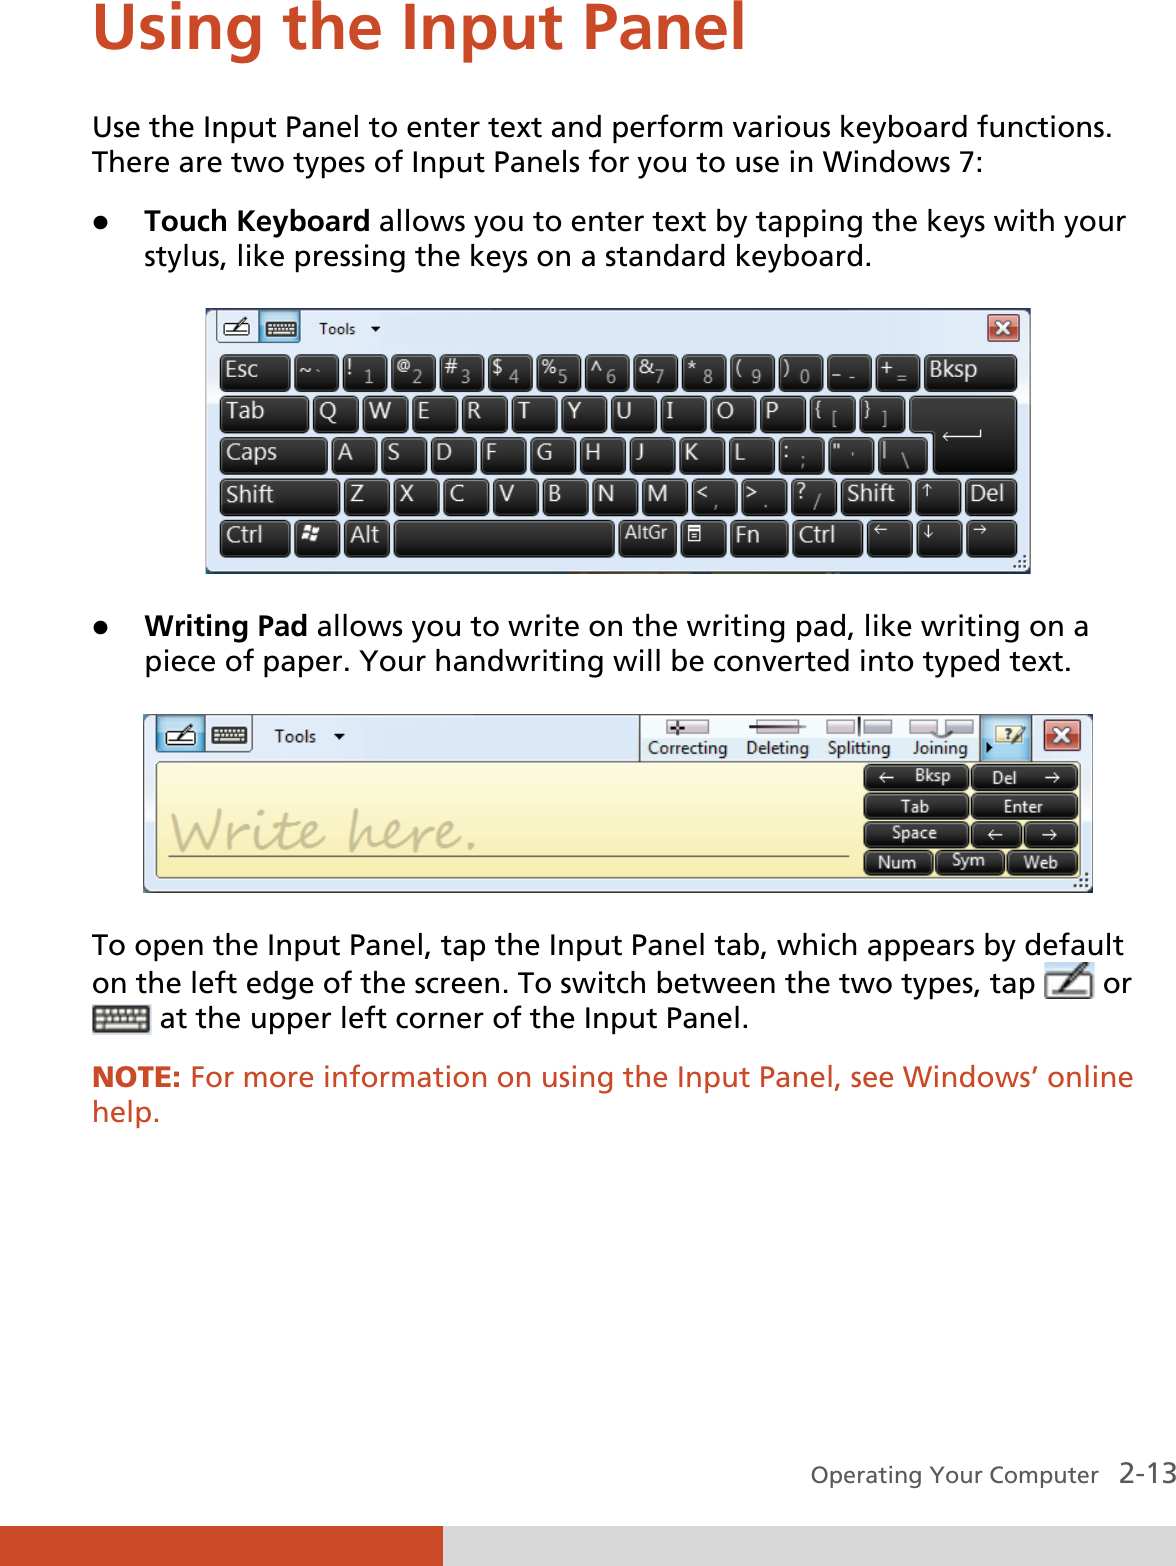  Operating Your Computer   2-13 Using the Input Panel Use the Input Panel to enter text and perform various keyboard functions. There are two types of Input Panels for you to use in Windows 7: z Touch Keyboard allows you to enter text by tapping the keys with your stylus, like pressing the keys on a standard keyboard.  z Writing Pad allows you to write on the writing pad, like writing on a piece of paper. Your handwriting will be converted into typed text.  To open the Input Panel, tap the Input Panel tab, which appears by default on the left edge of the screen. To switch between the two types, tap   or   at the upper left corner of the Input Panel. NOTE: For more information on using the Input Panel, see Windows’ online help.  